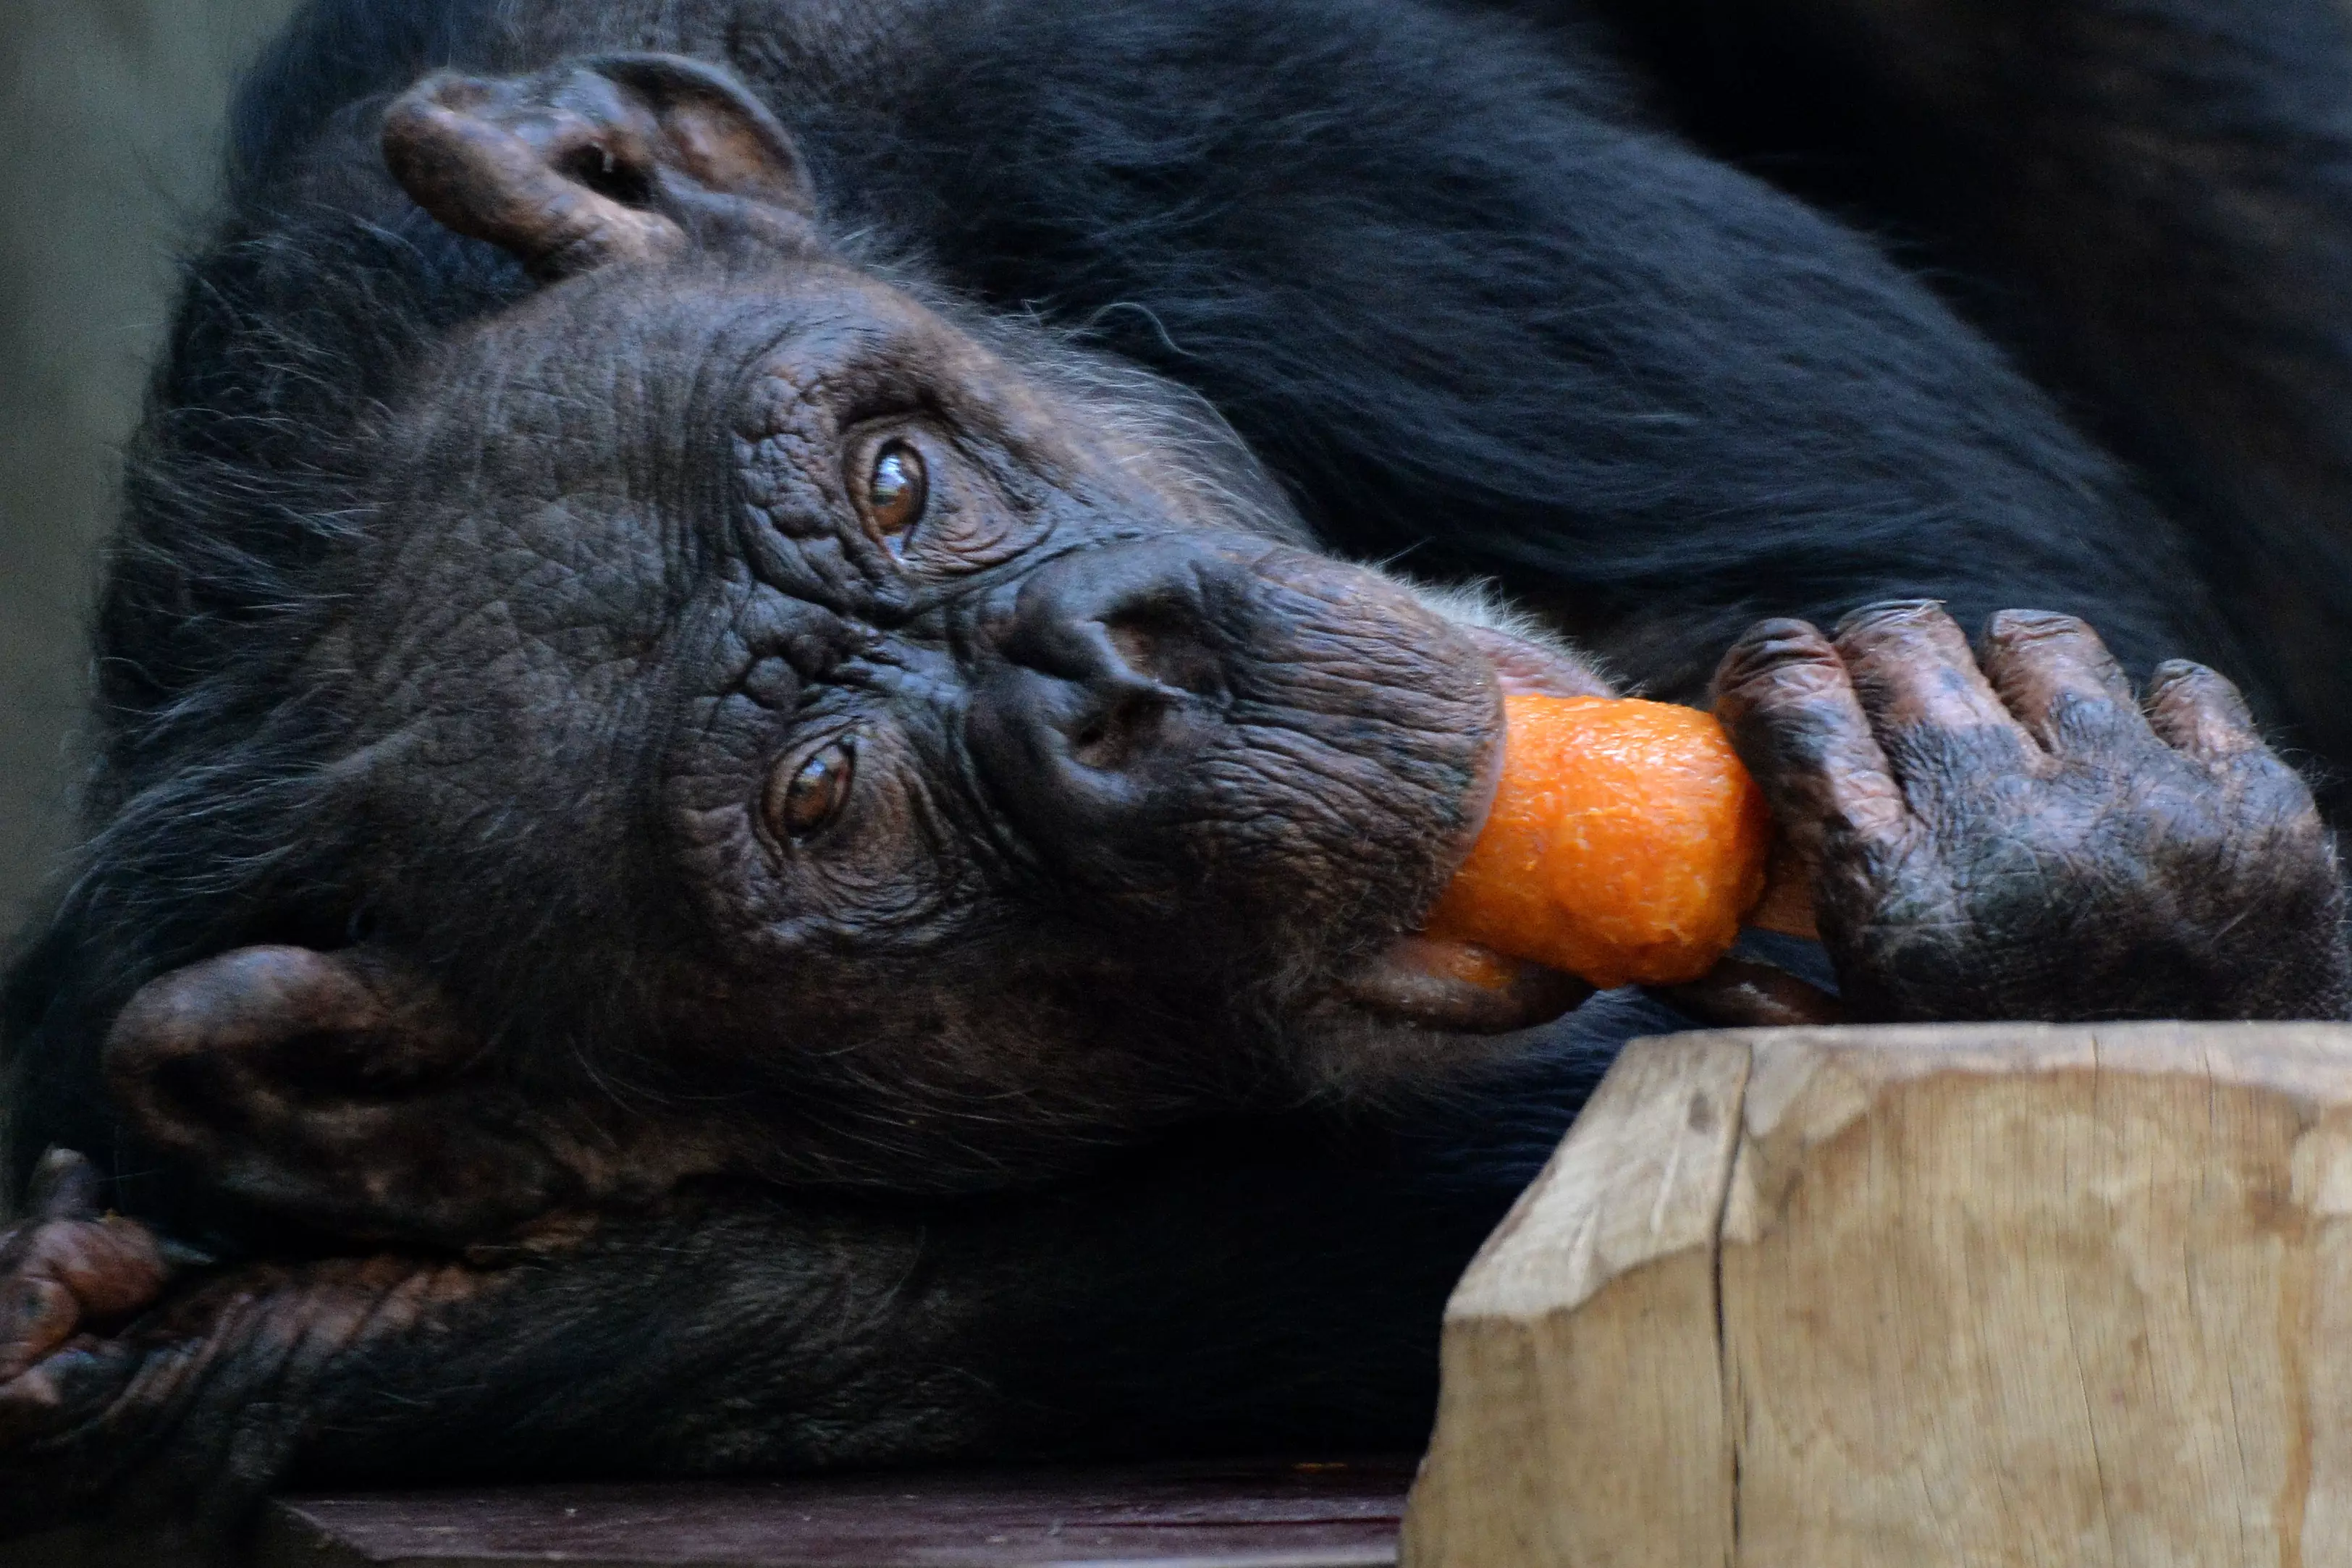 A chimp, though not the one that hurt Ollie.